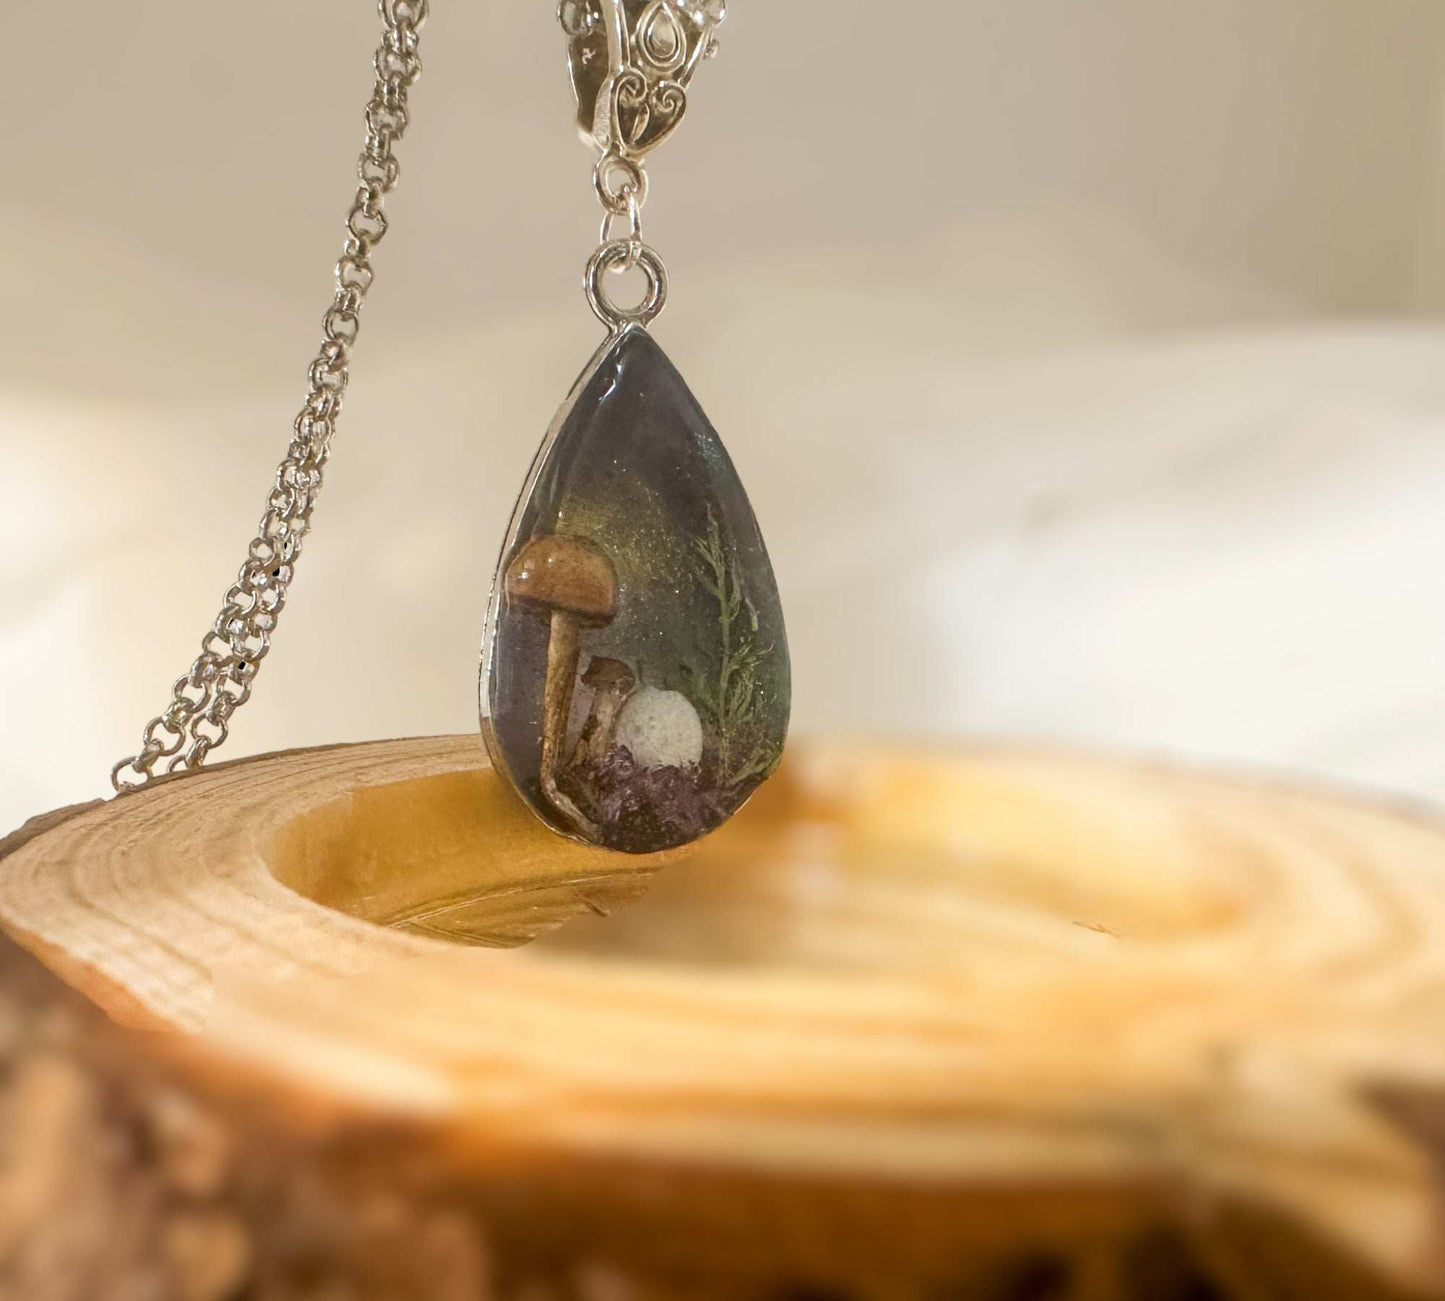 Forest Elegance: Teardrop Pendant with Northern Lights and Mushrooms